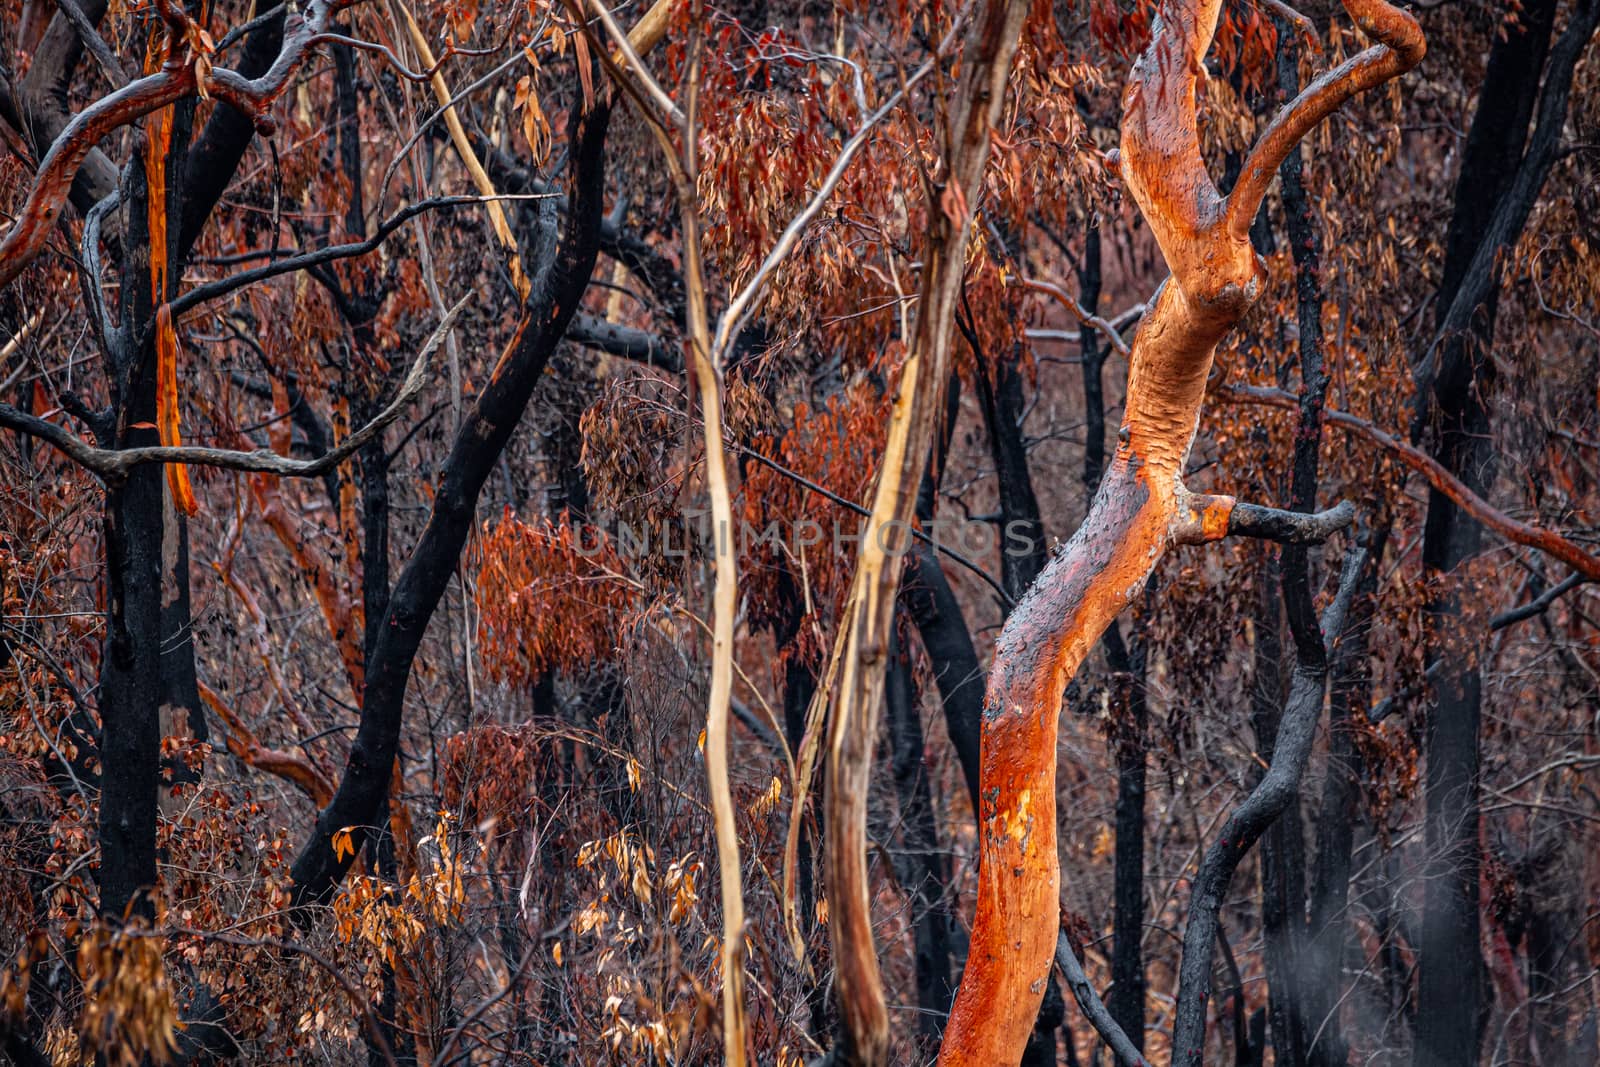 The burnt and charred bush land after summer wild fires in Australia